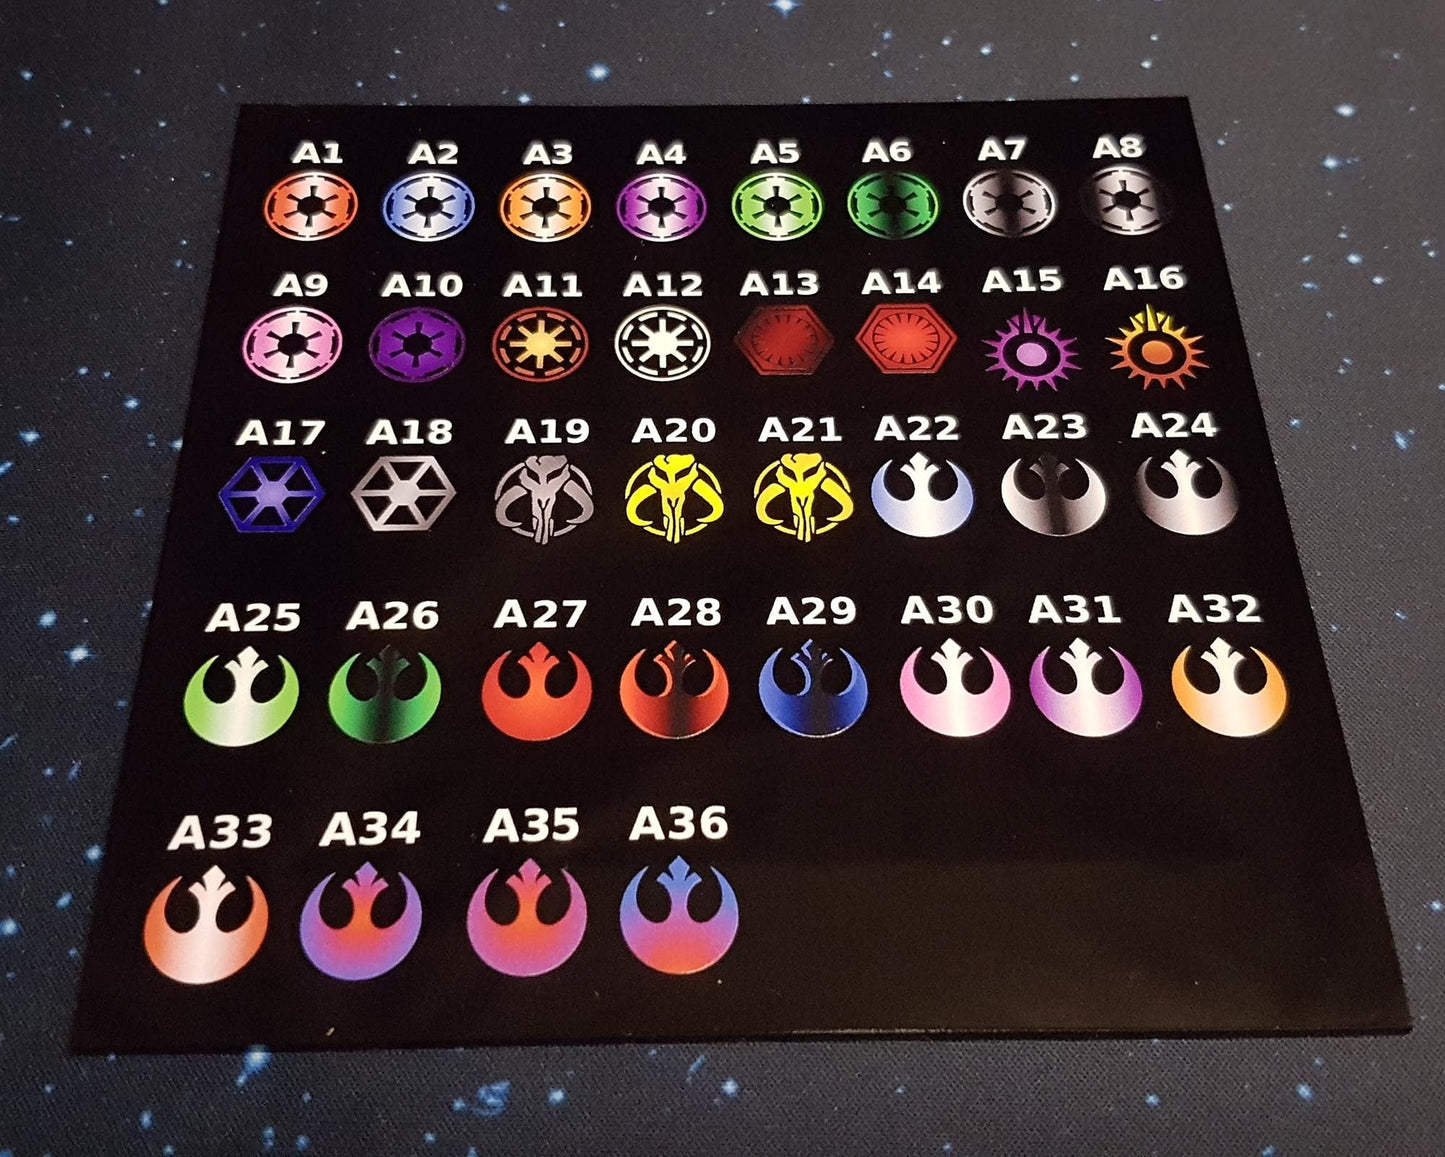 V2 Acrylic Colour Printed Promo Damage Deck Holder (Black Sun) for Star Wars X-Wing